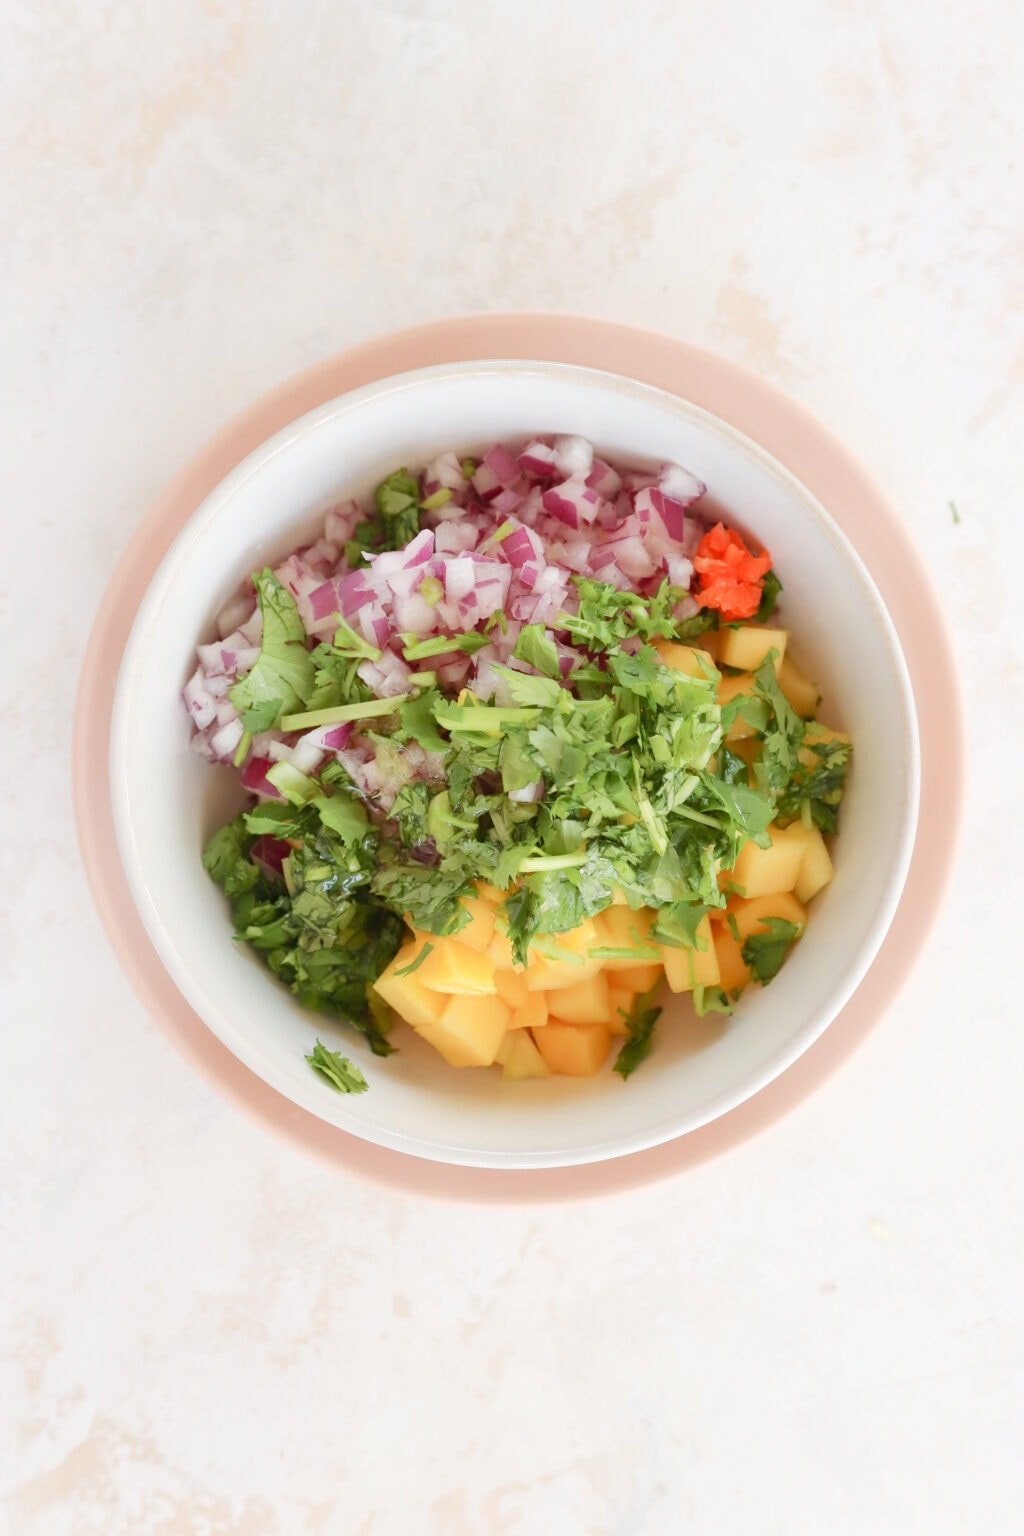 In a white bowl with a pink rim is ingredients for a salsa. There is cubed mango, diced red onion, diced habanero pepper, honey and cilantro all piled. The ingredients have not yet been mixed together.